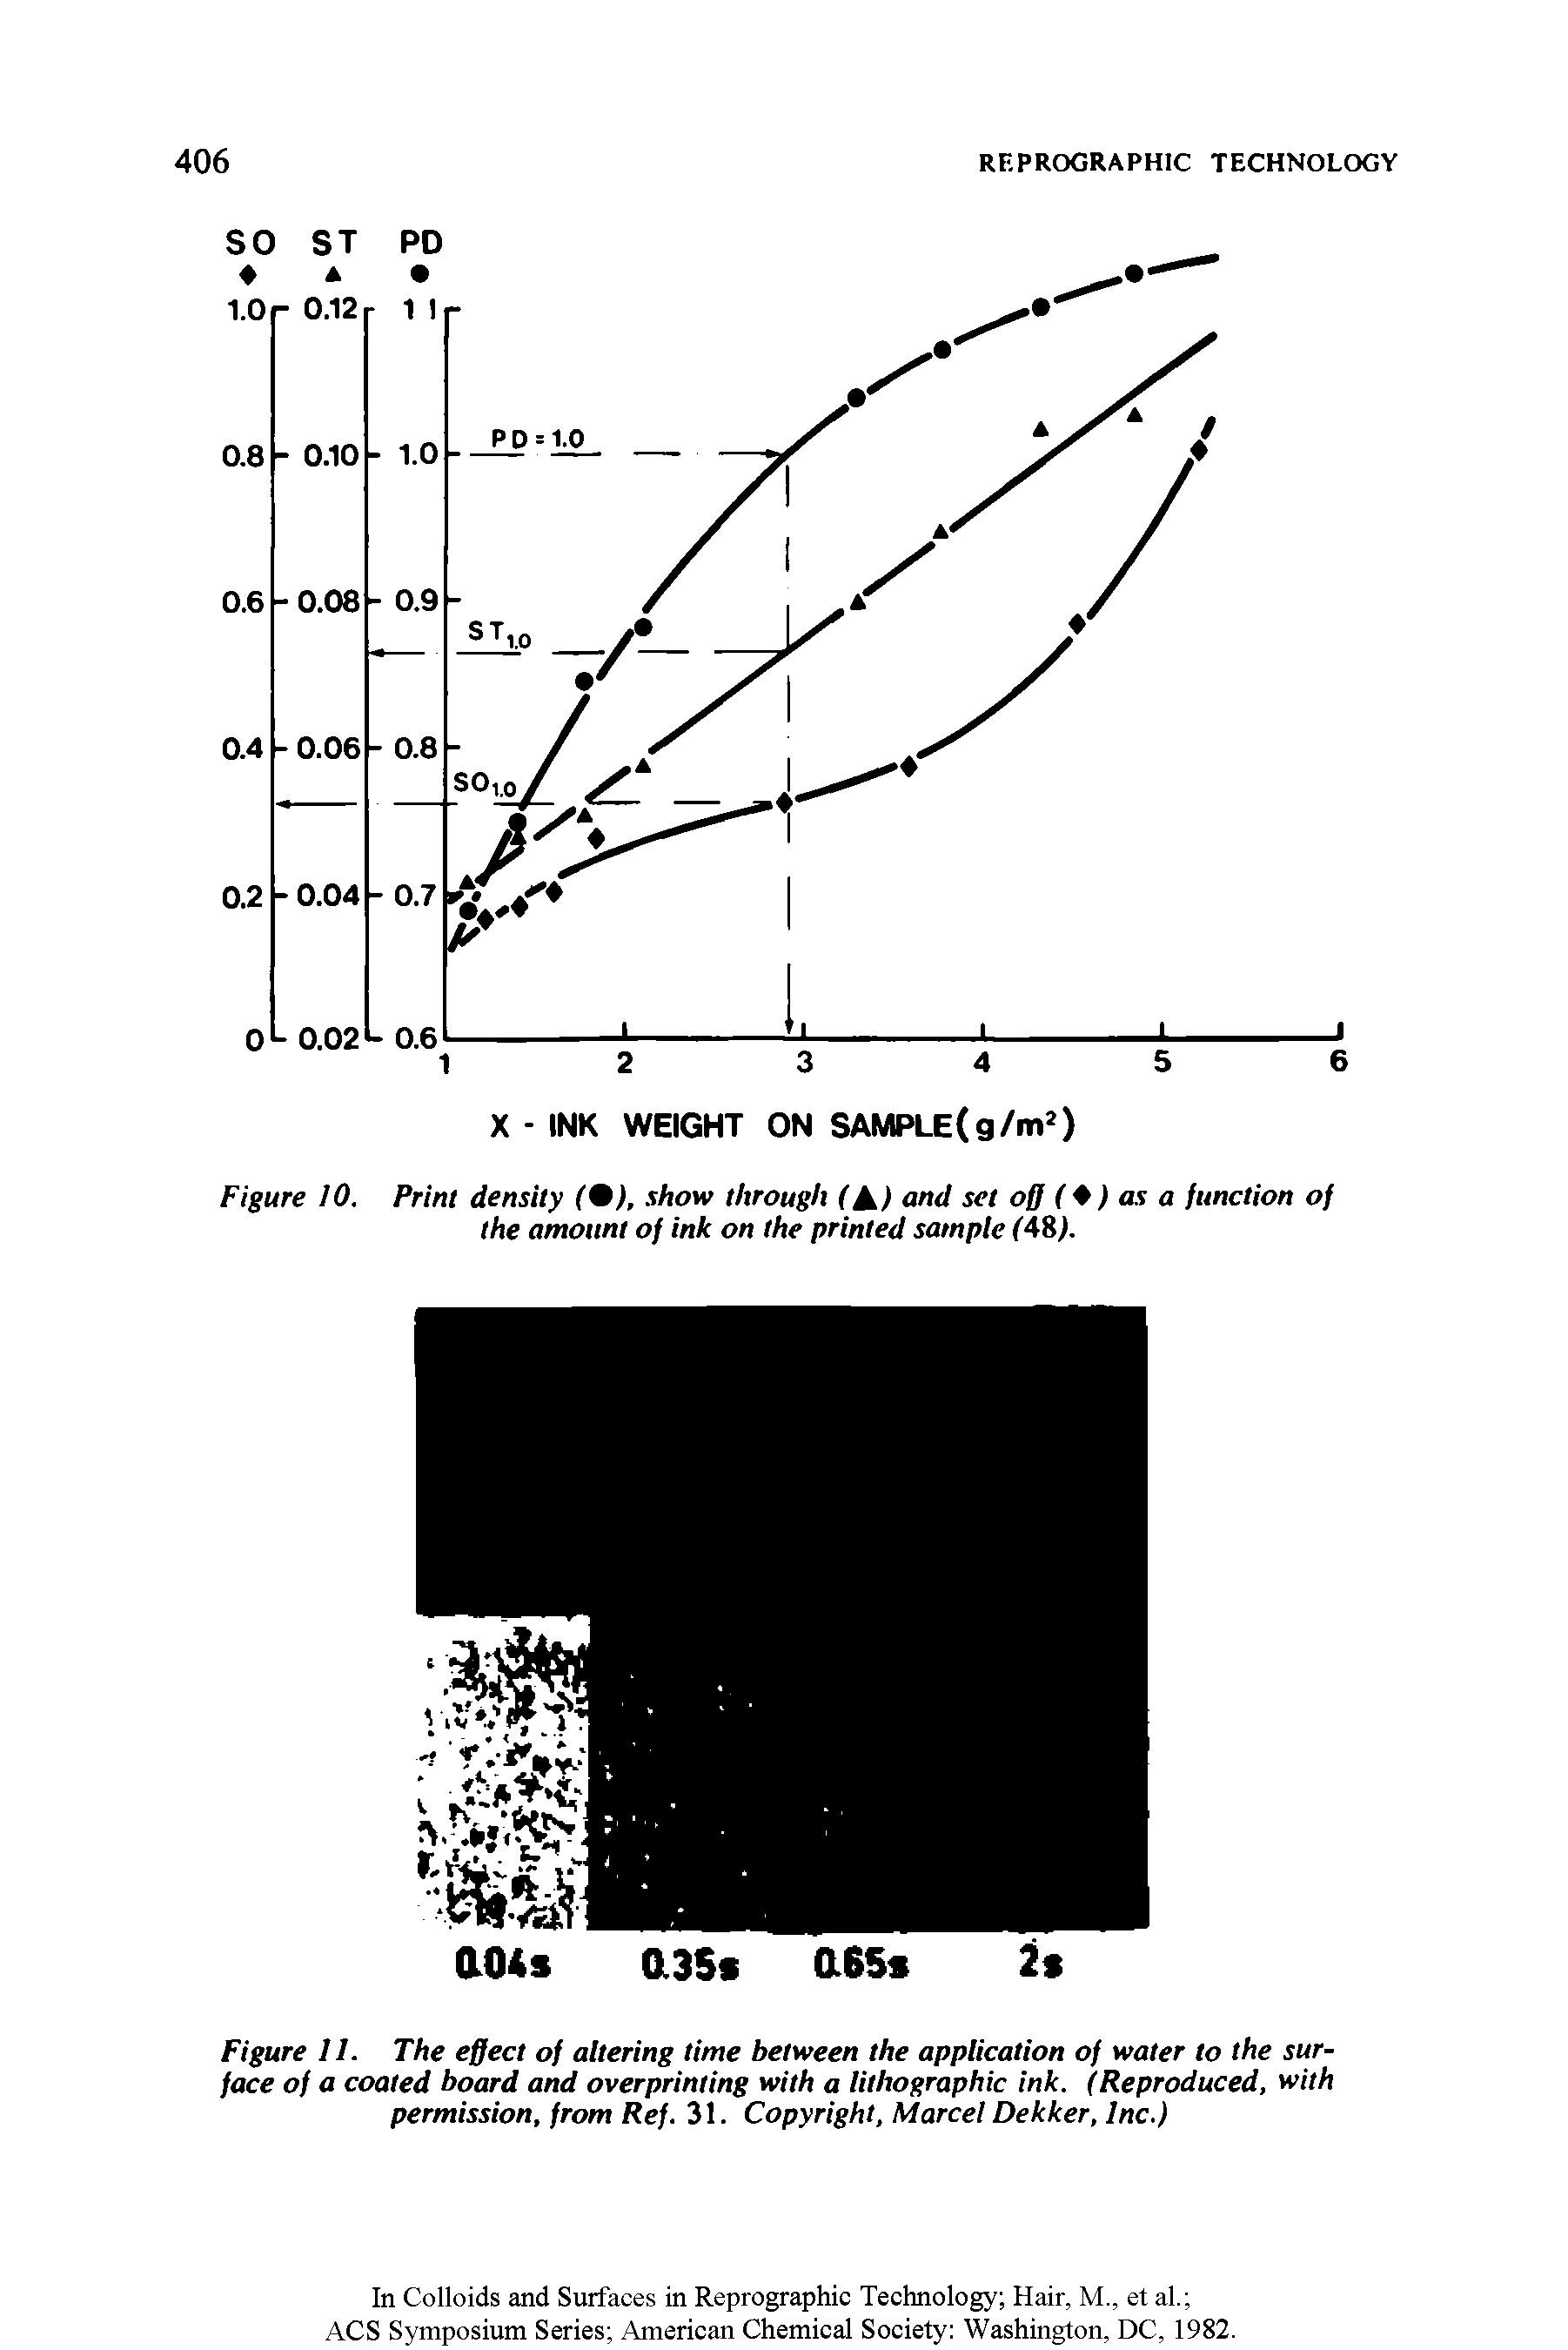 Figure 11. The effect of altering time between the application of water to the surface of a coated board and overprinting with a lithographic ink. (Reproduced, with permission, from Ref. 31. Copyright, Marcel Dekker, Inc.)...